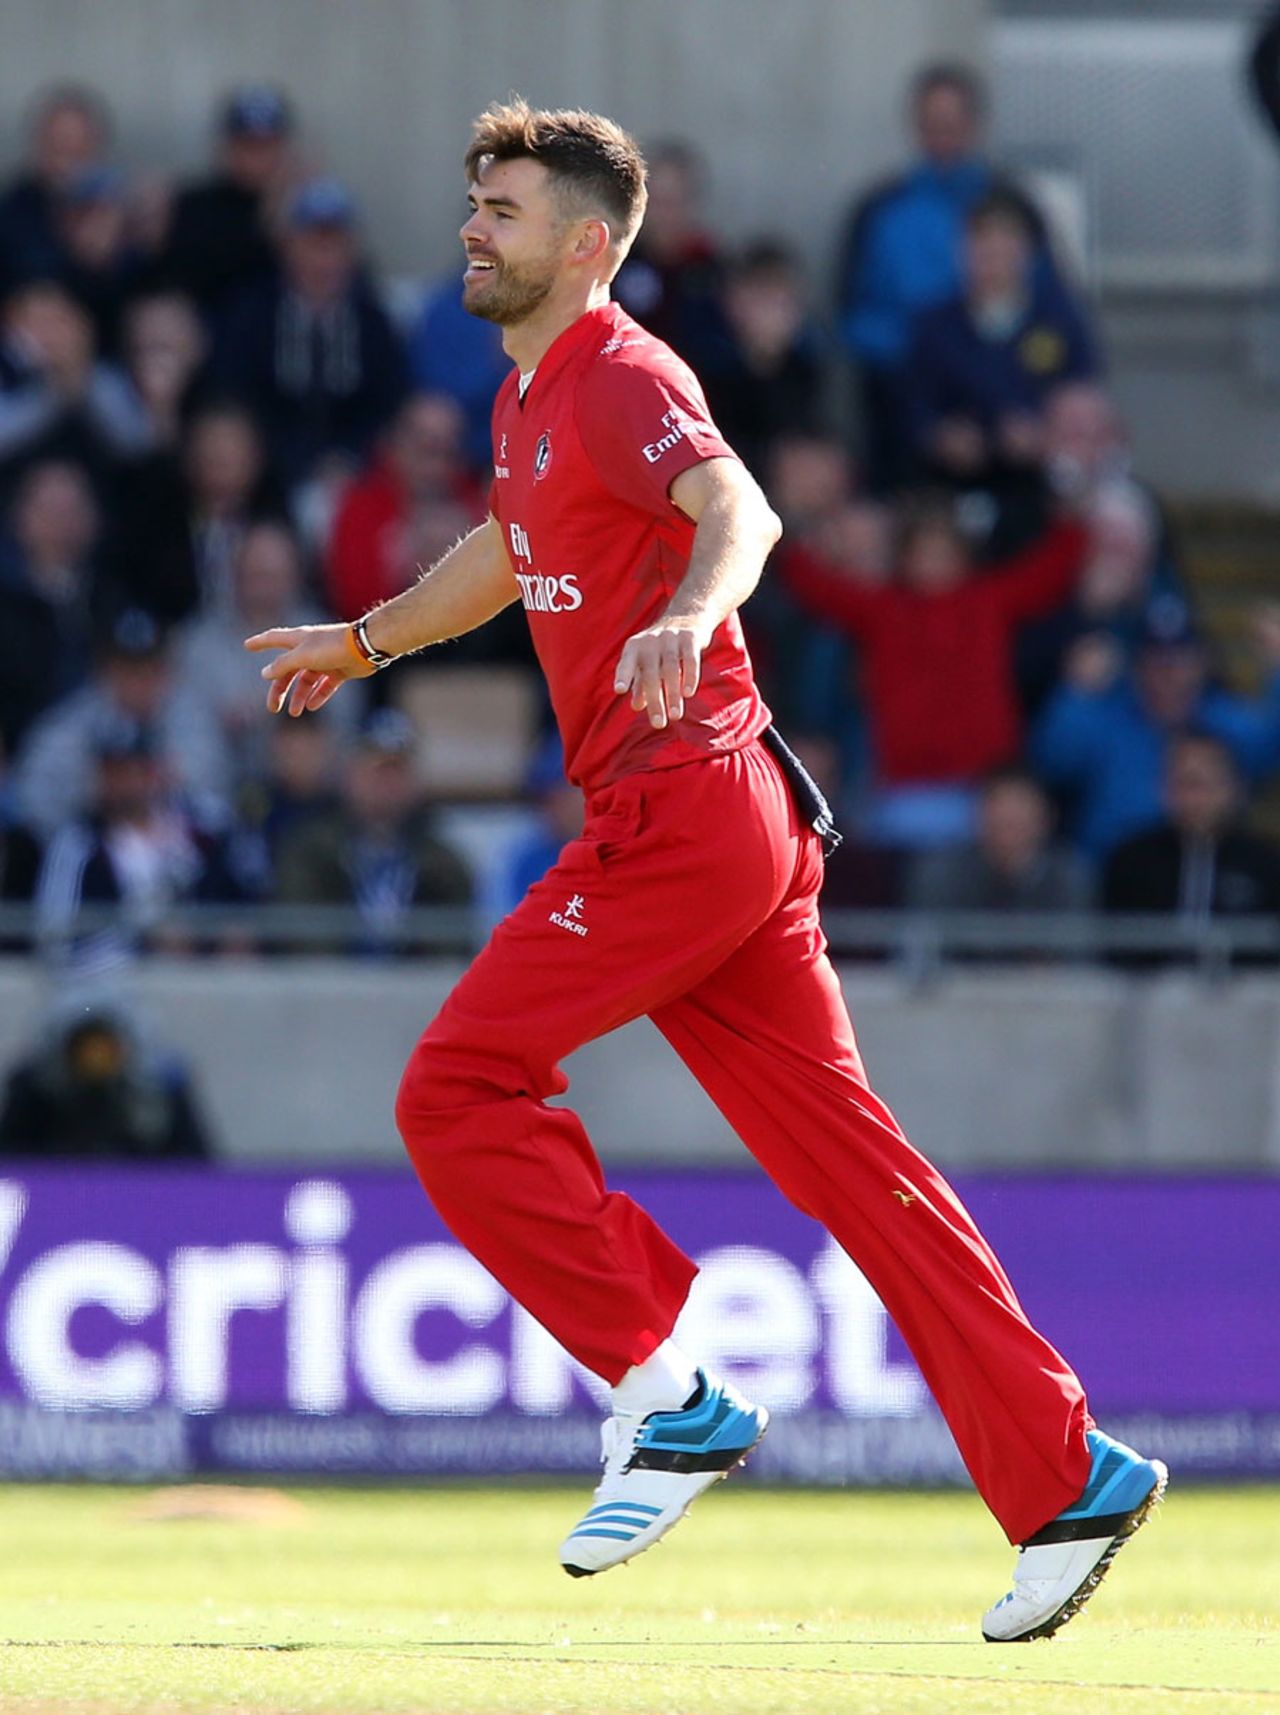 James Anderson took a wicket in his first over, Hampshire v Lancashire, 2nd NatWest T20 Blast semi-final, Edgbaston, August 23, 2014